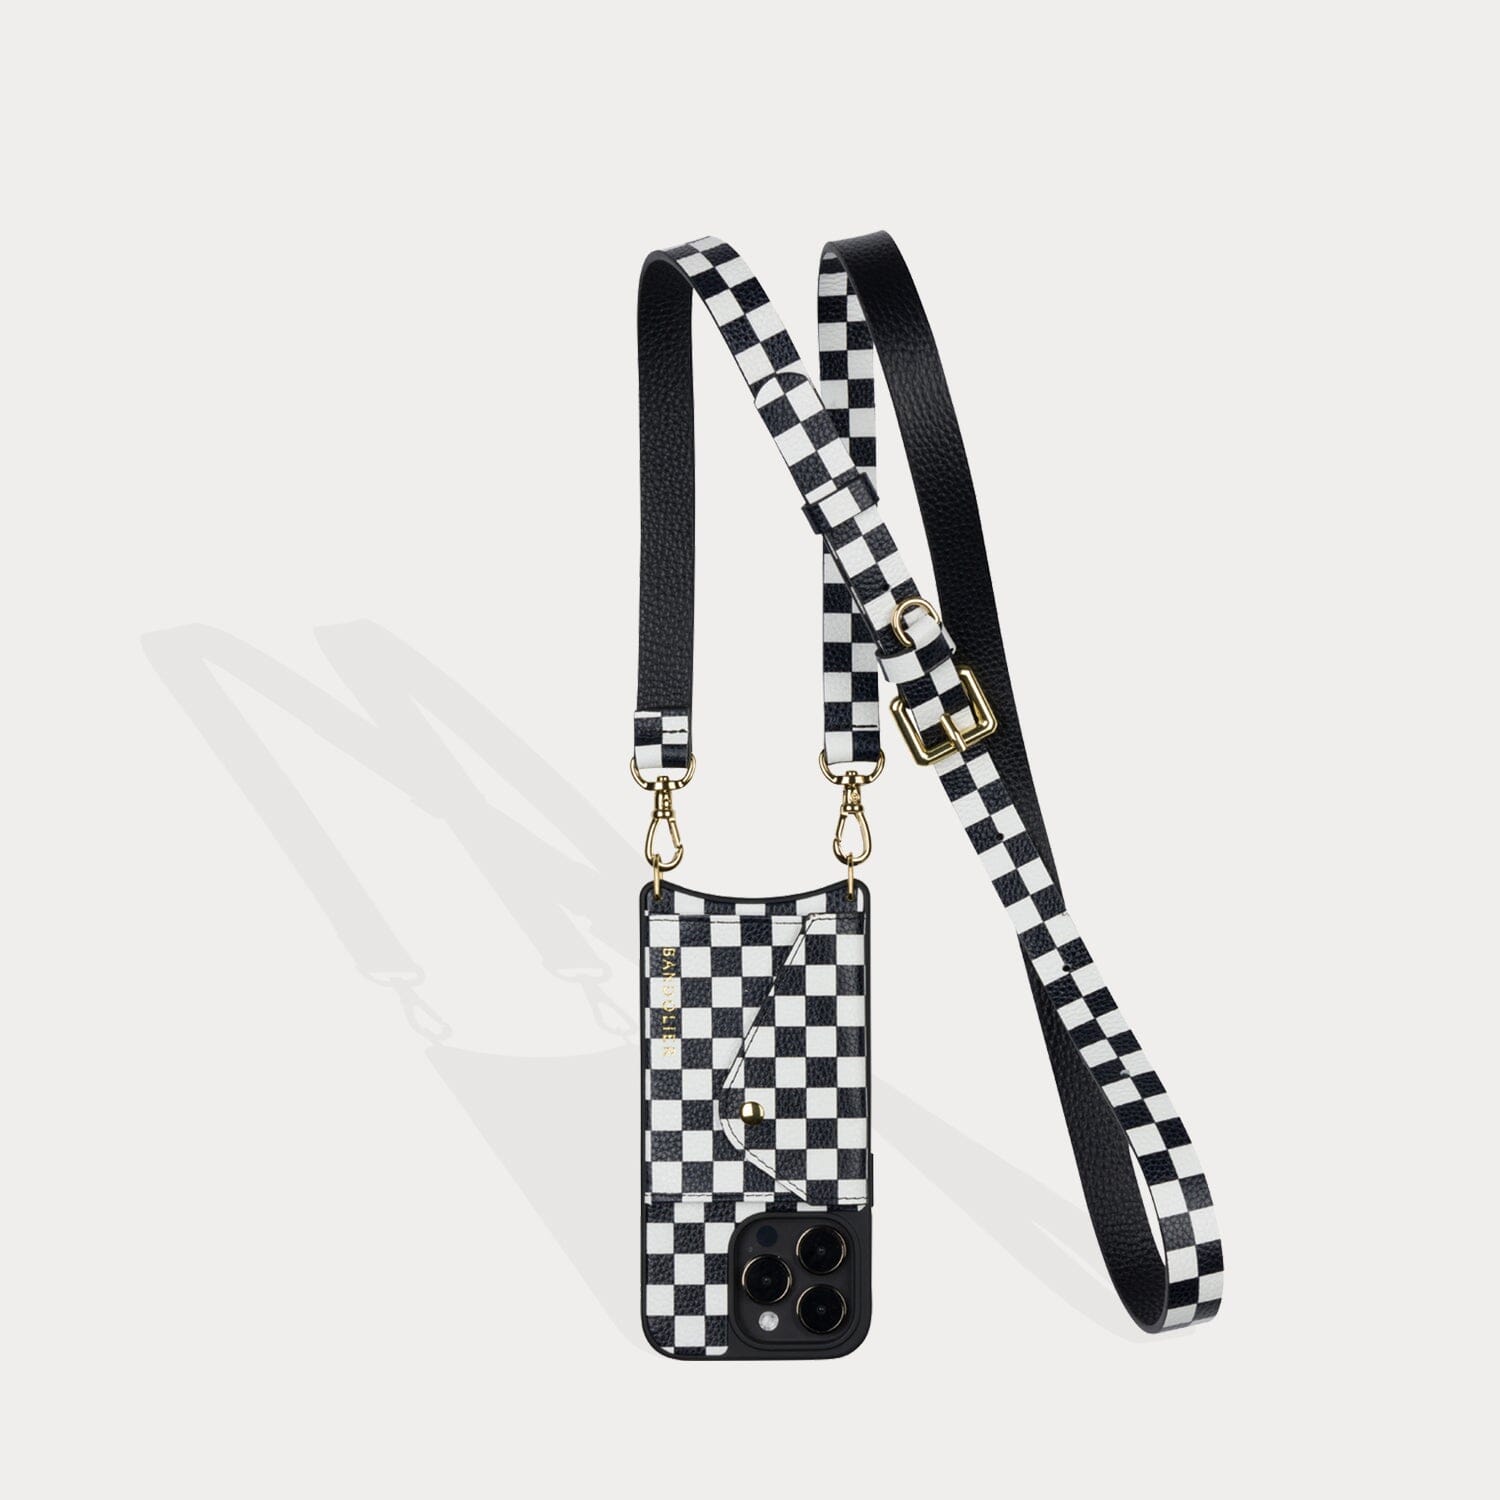 Hailey Rhinestone Strap Only in Black/Silver | Genuine Leather | Bandolier Style